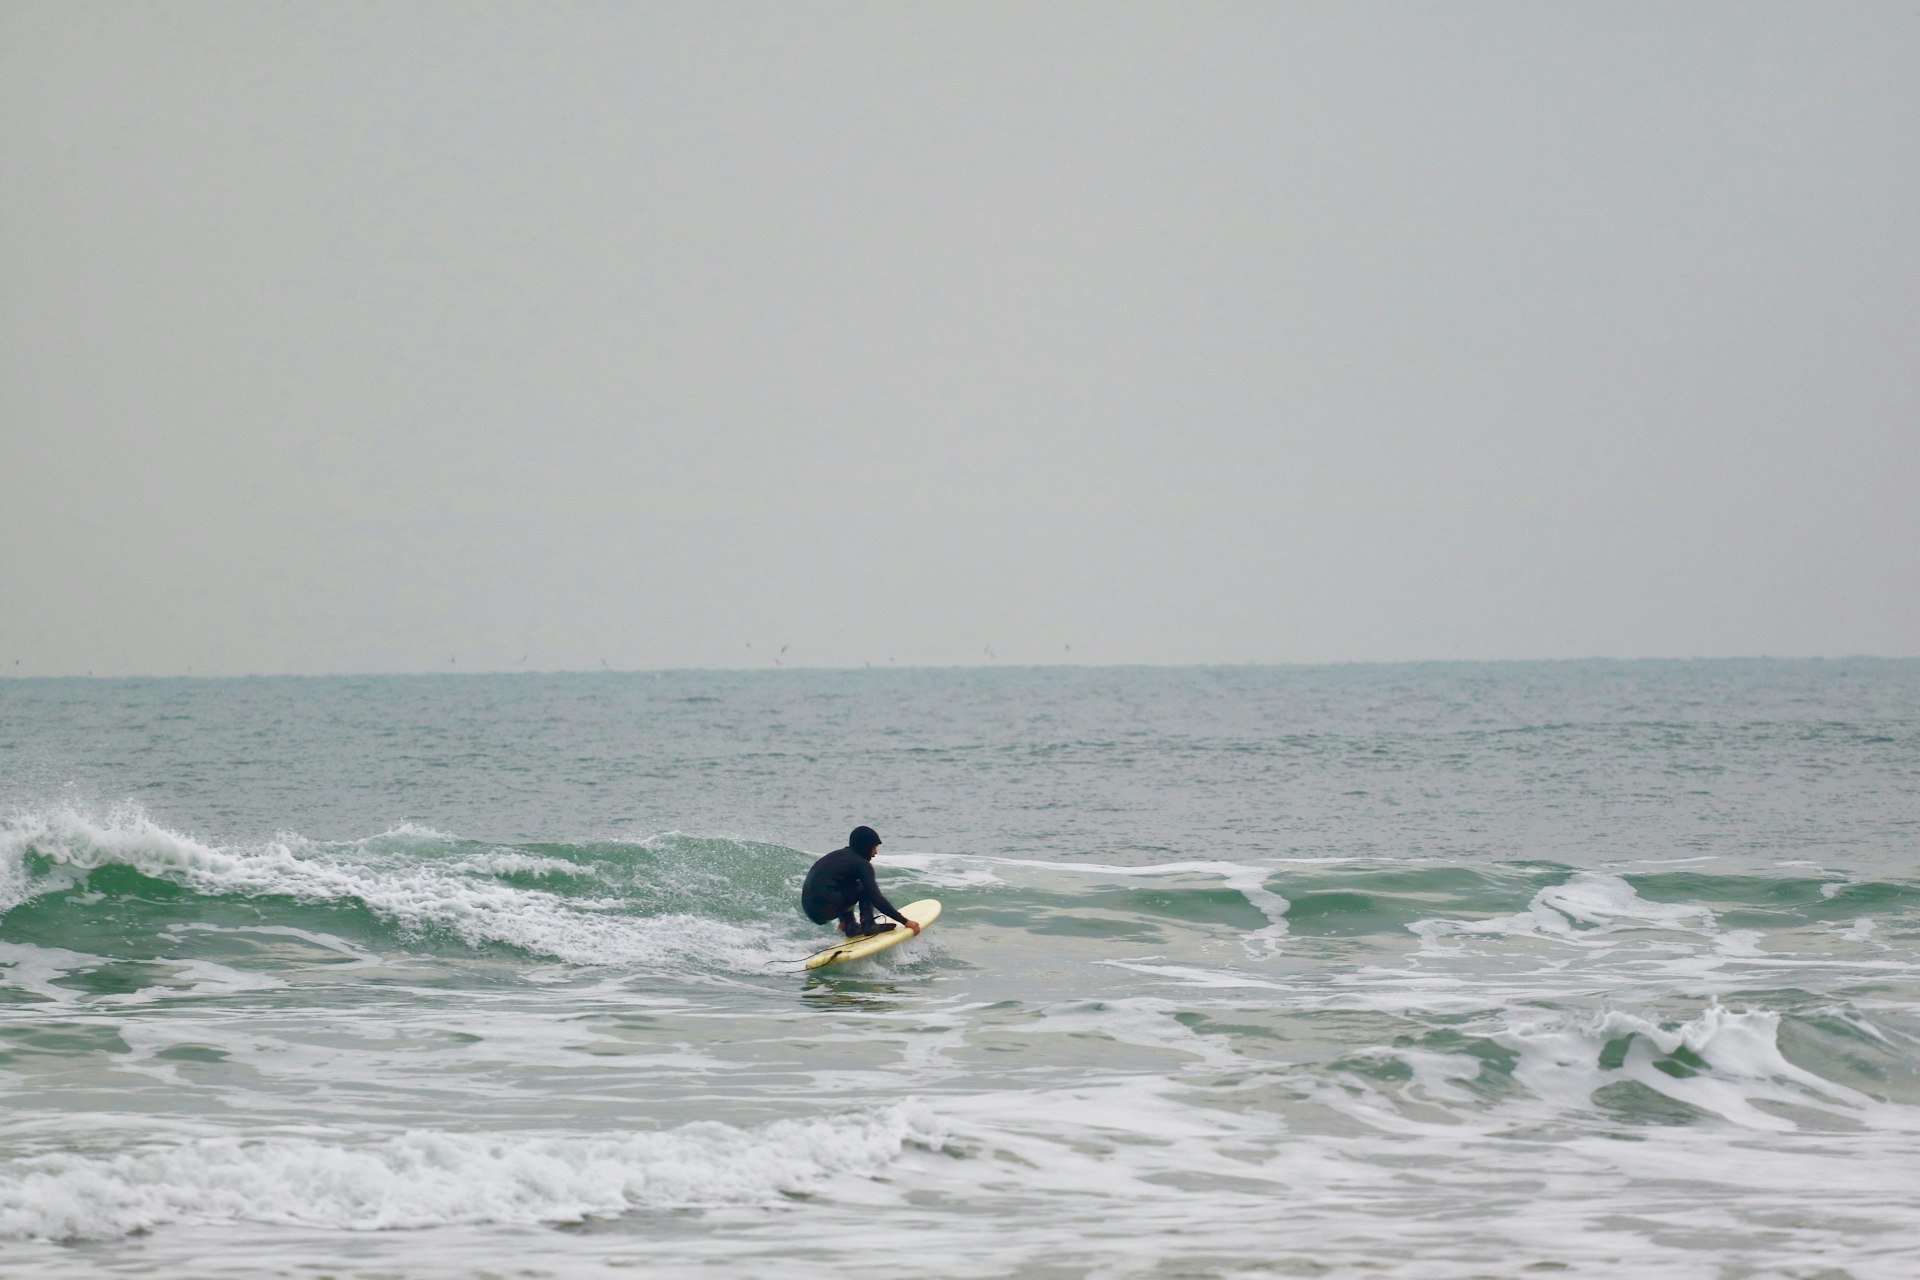 Surfer on the waters at Whitesands Bay